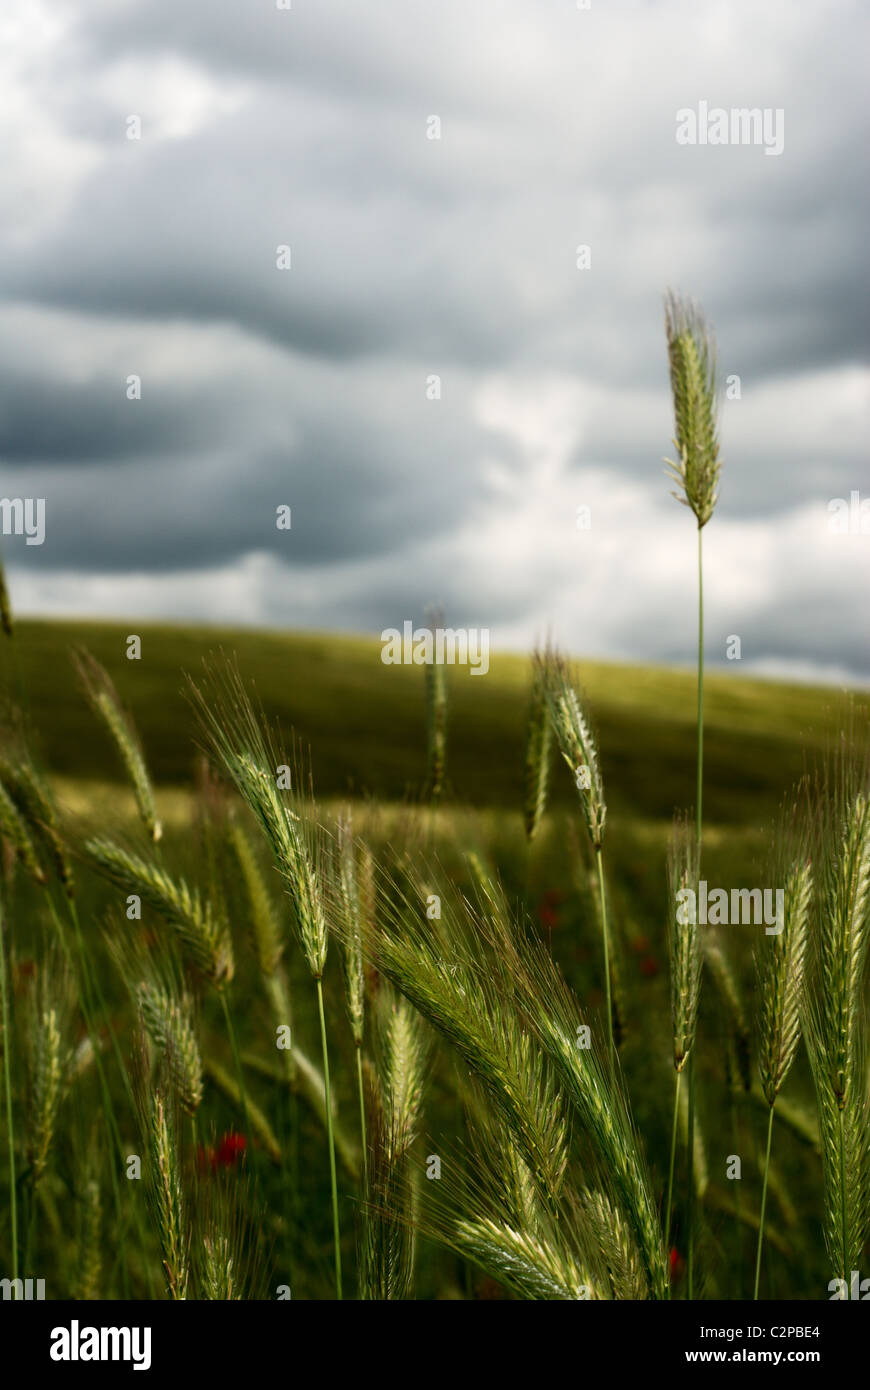 Wheat stems standing up against stormy sky Stock Photo